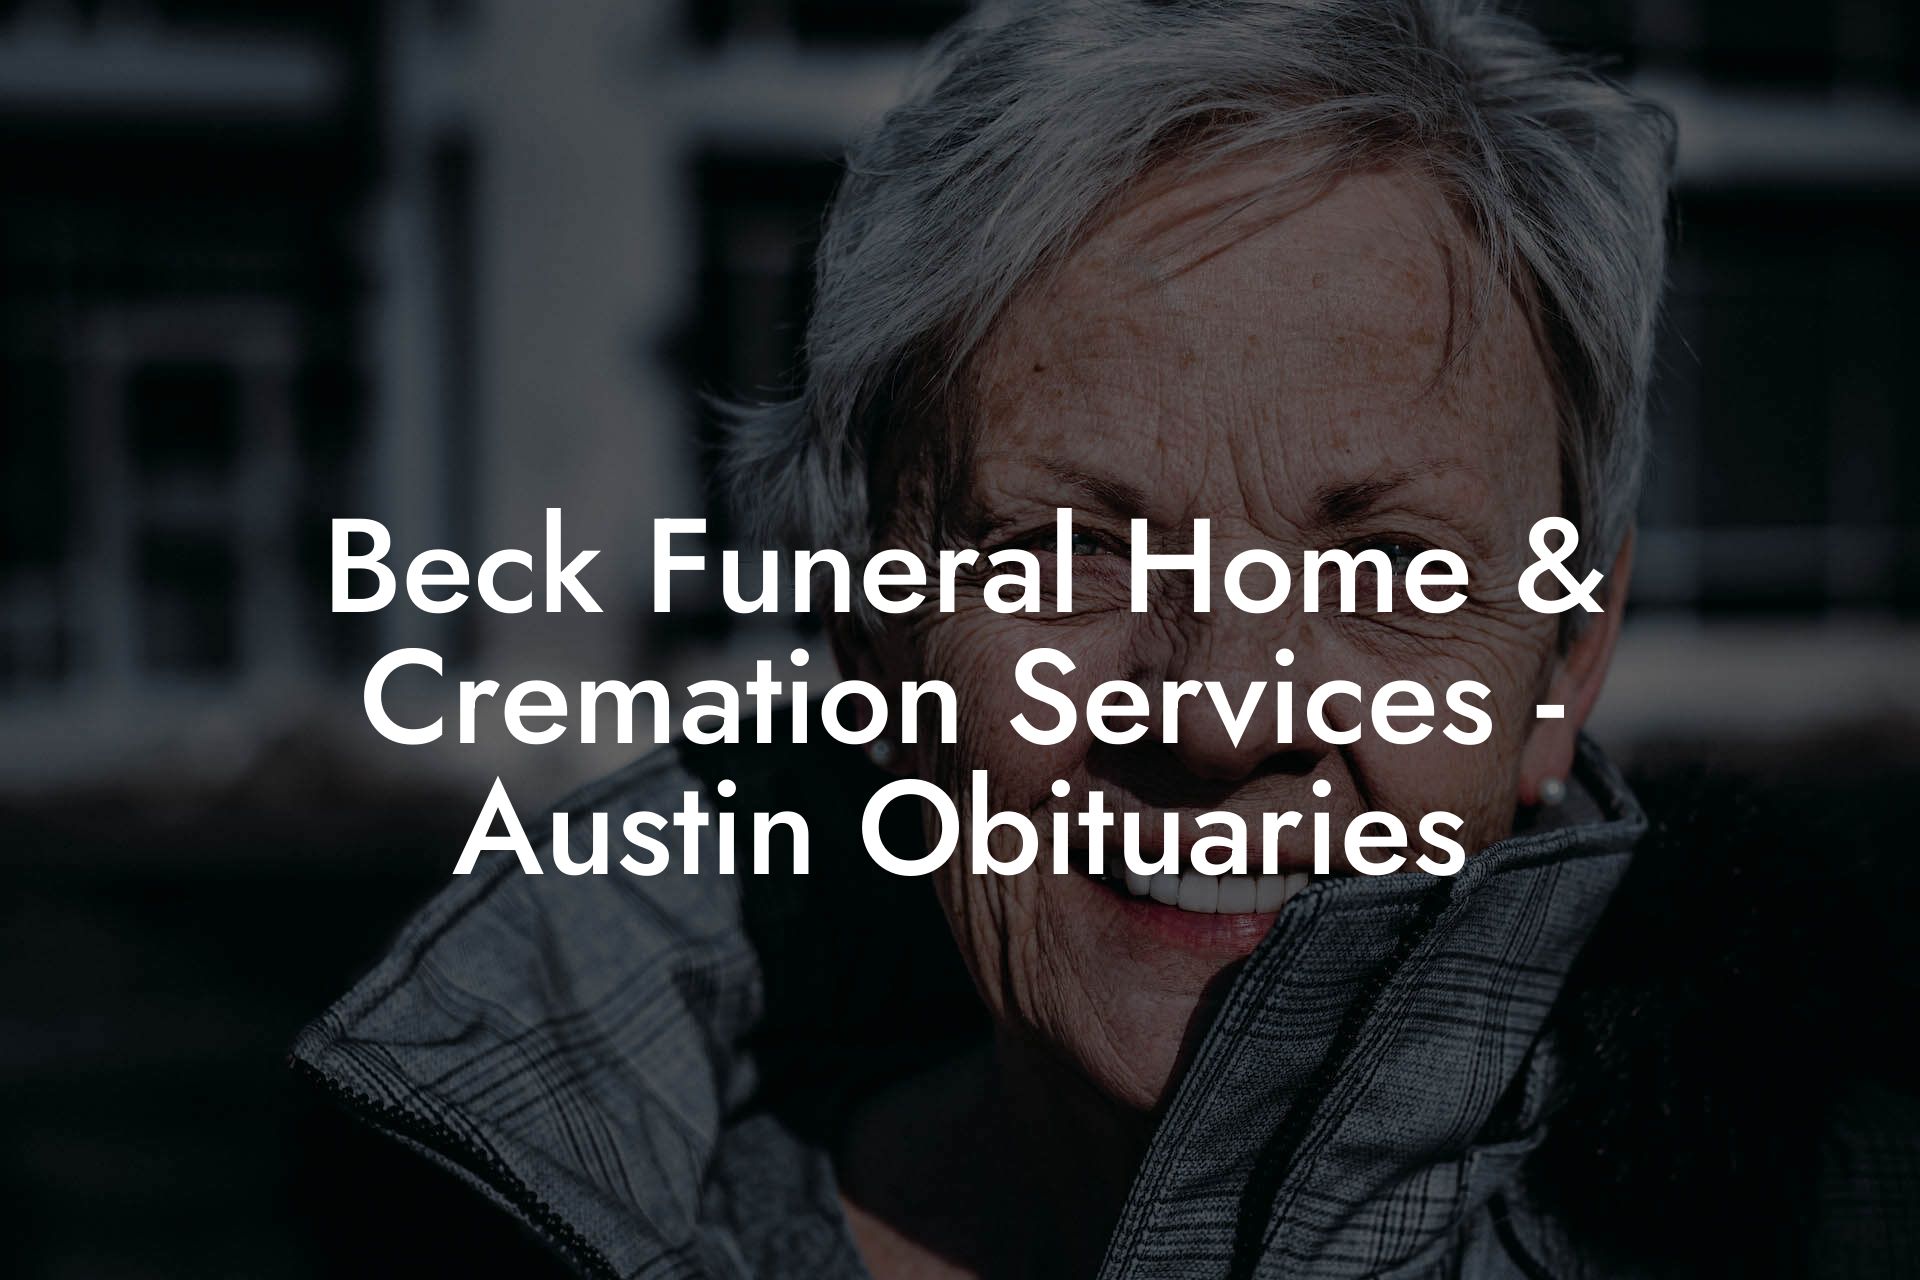 Beck Funeral Home & Cremation Services - Austin Obituaries